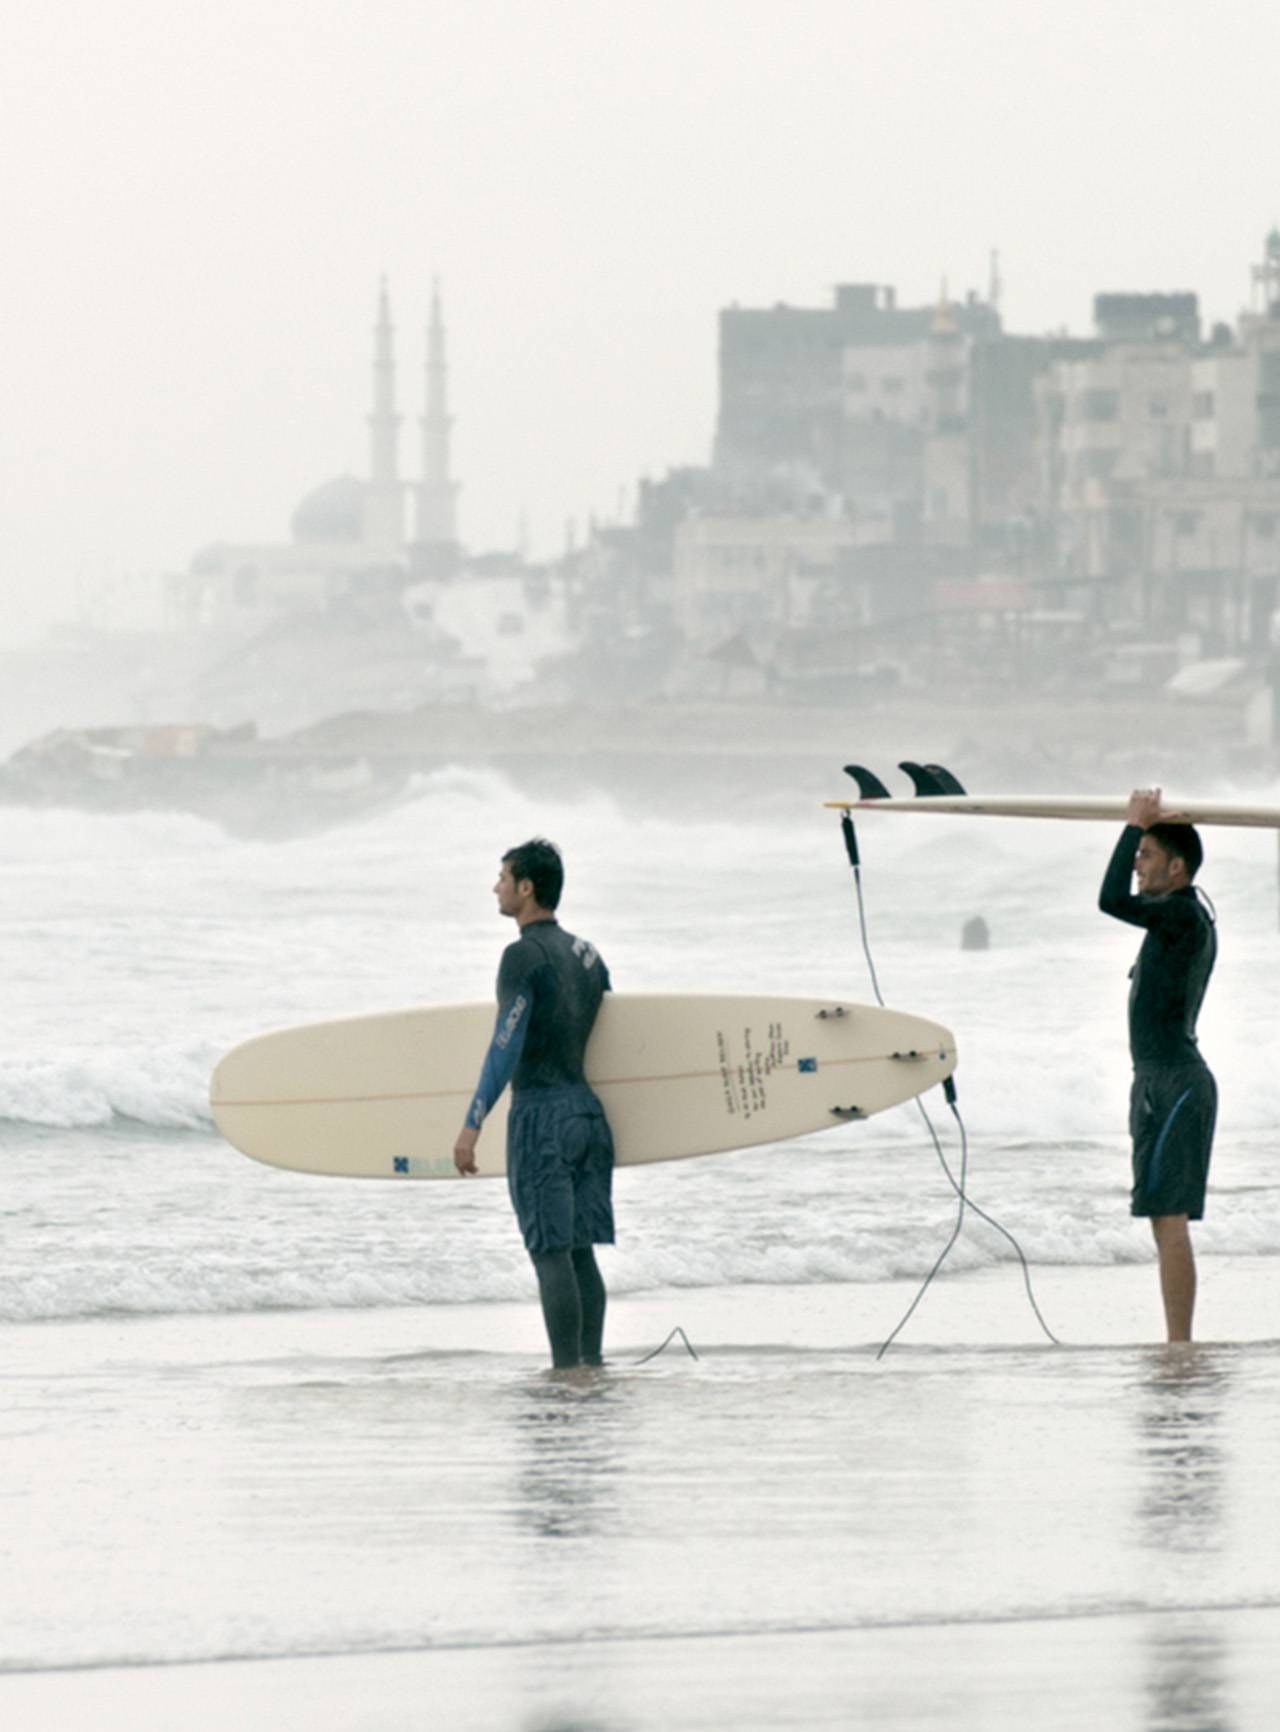 Support the Gaza Surf Club